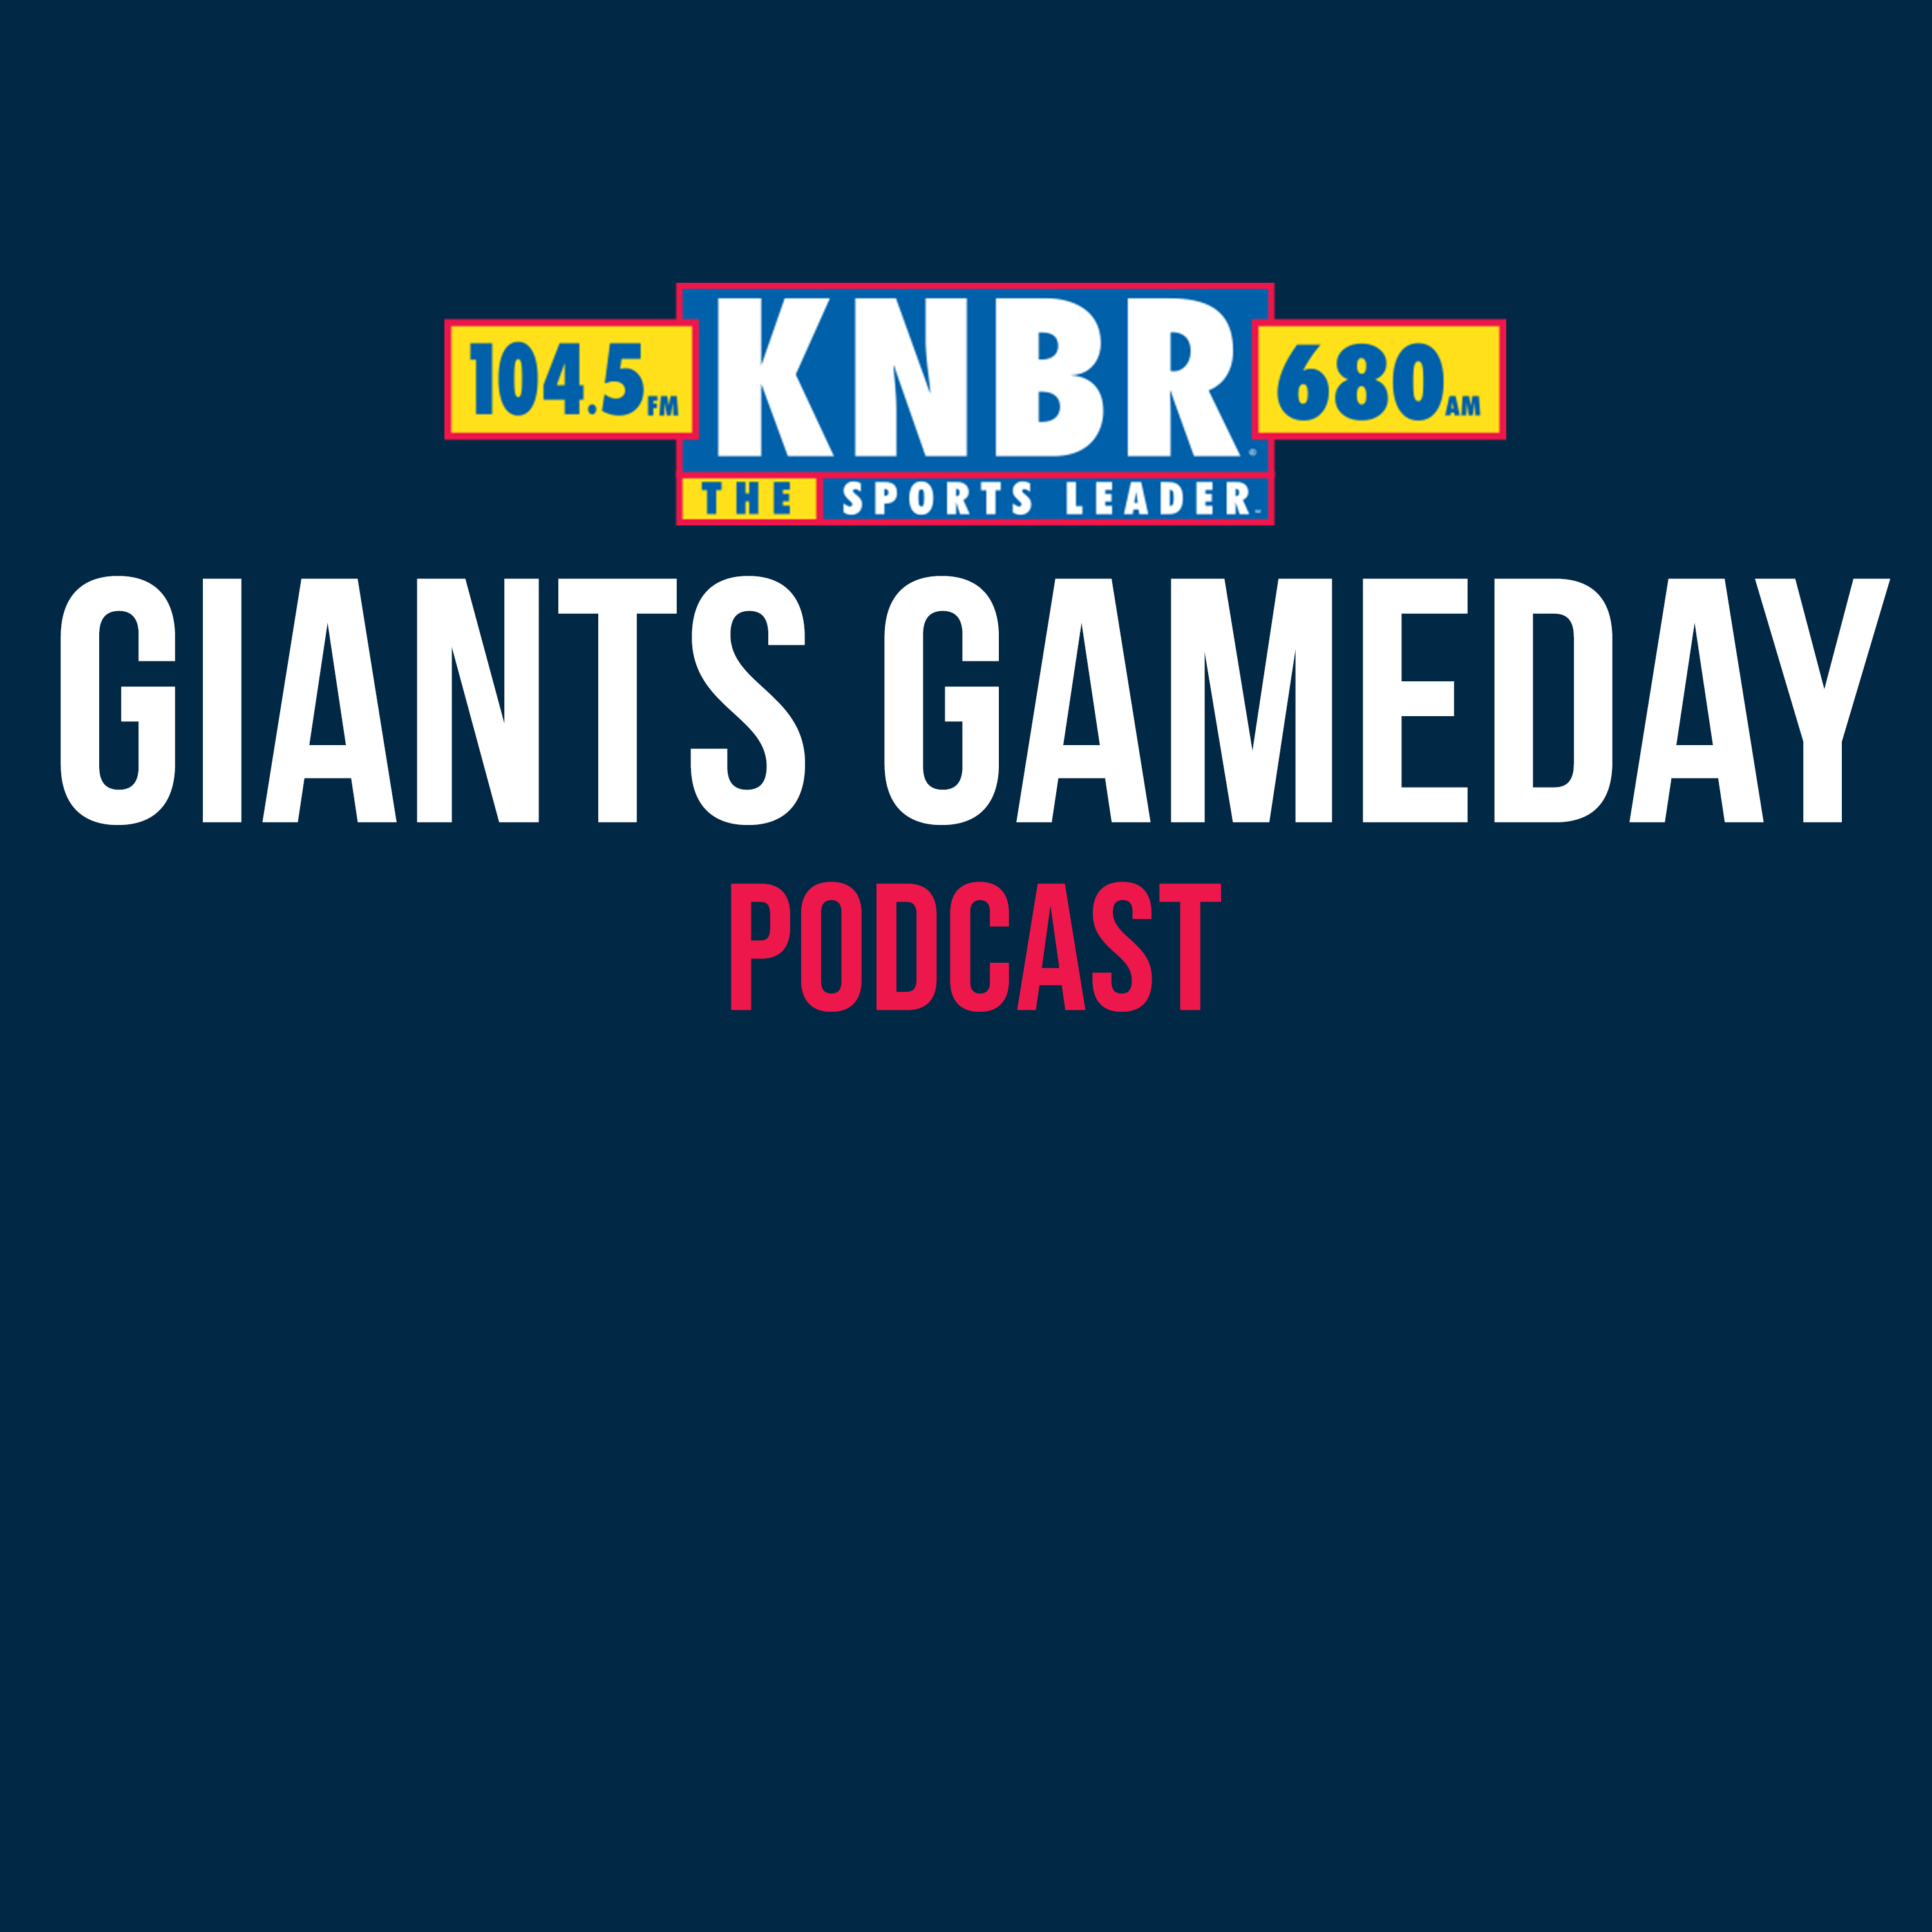 5-15 Curt Casali joins Jon Miller on the Giants post-game show to recap tonight's win and to discuss what it was like to don the orange & black uniform again